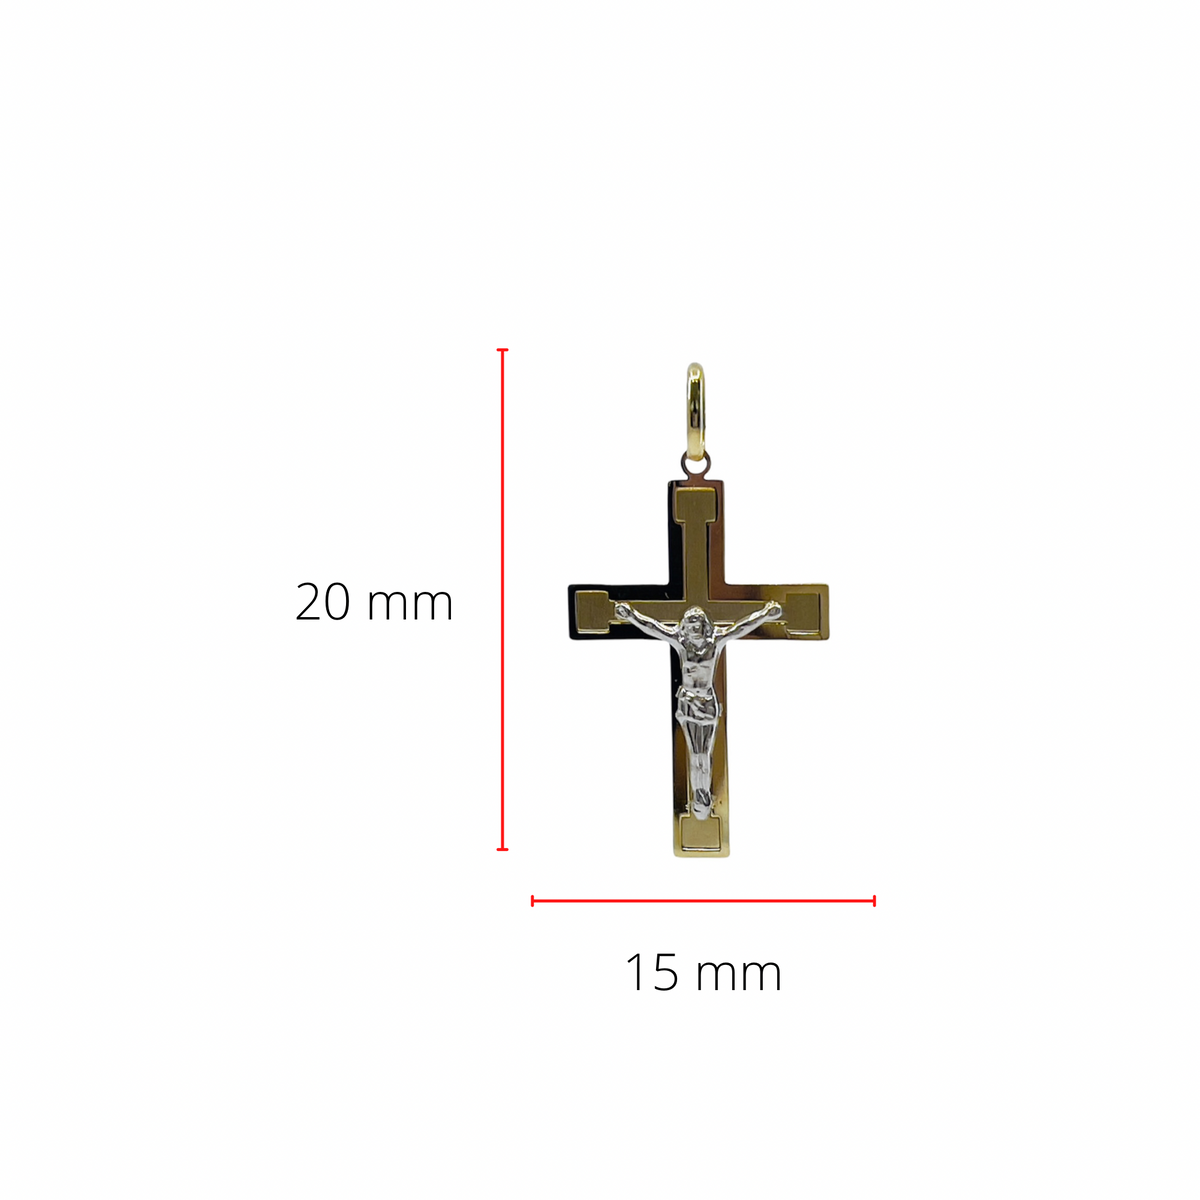 10K Two Tone White and Yellow Gold Cross - 18mm x 13mm